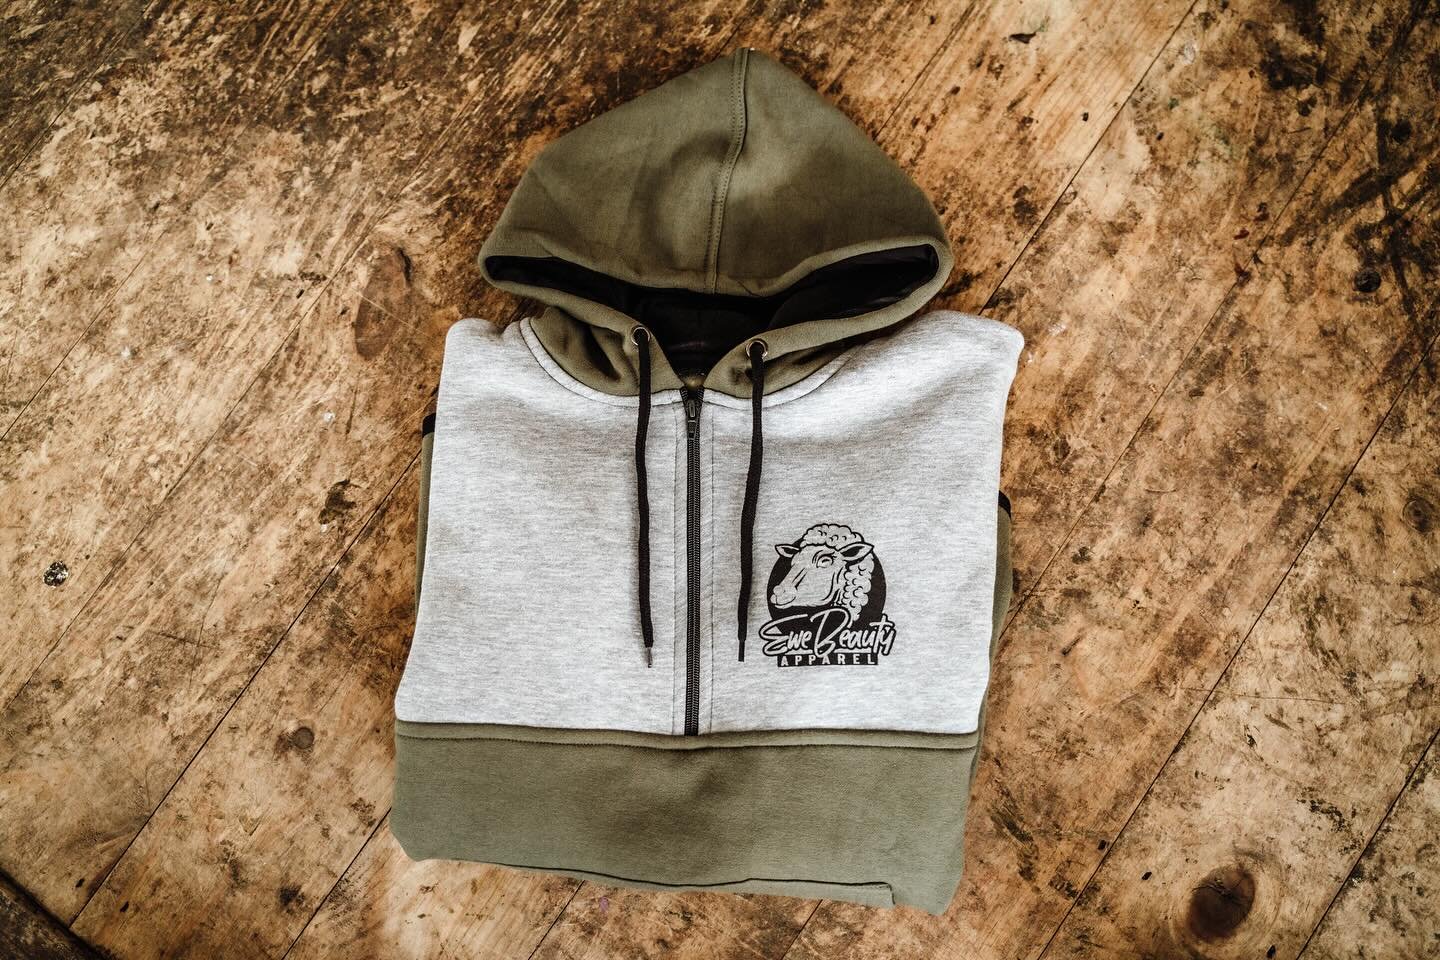 YOUR FAVOURITE SHEARING HOODIE IS RETURNING&hellip; 🙌

THE OLIVE HOODIE WILL BE READY FOR WINTER 🥶 ! 

+ WILL BE AVAILABLE IN KIDS!!!!

KEEP POSTED FOR THE RELEASE. 

#winterfashion #winteroutfit #wintercollection #hoodie #shearinghoodie #hoodies #